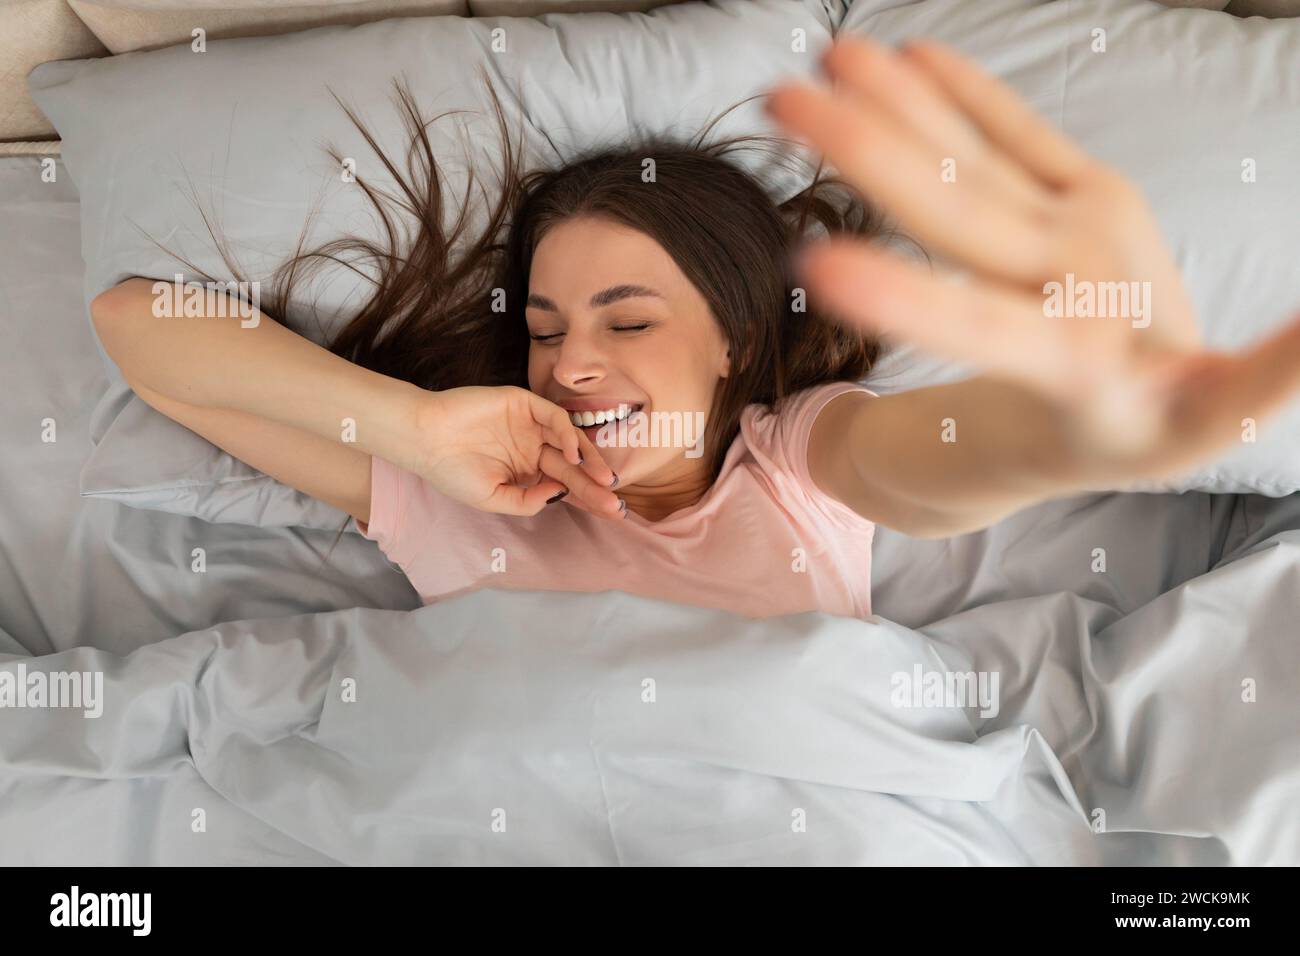 Joyful young lady stretching in bed with closed eyes and smile on her face after waking up in the morning, top view Stock Photo